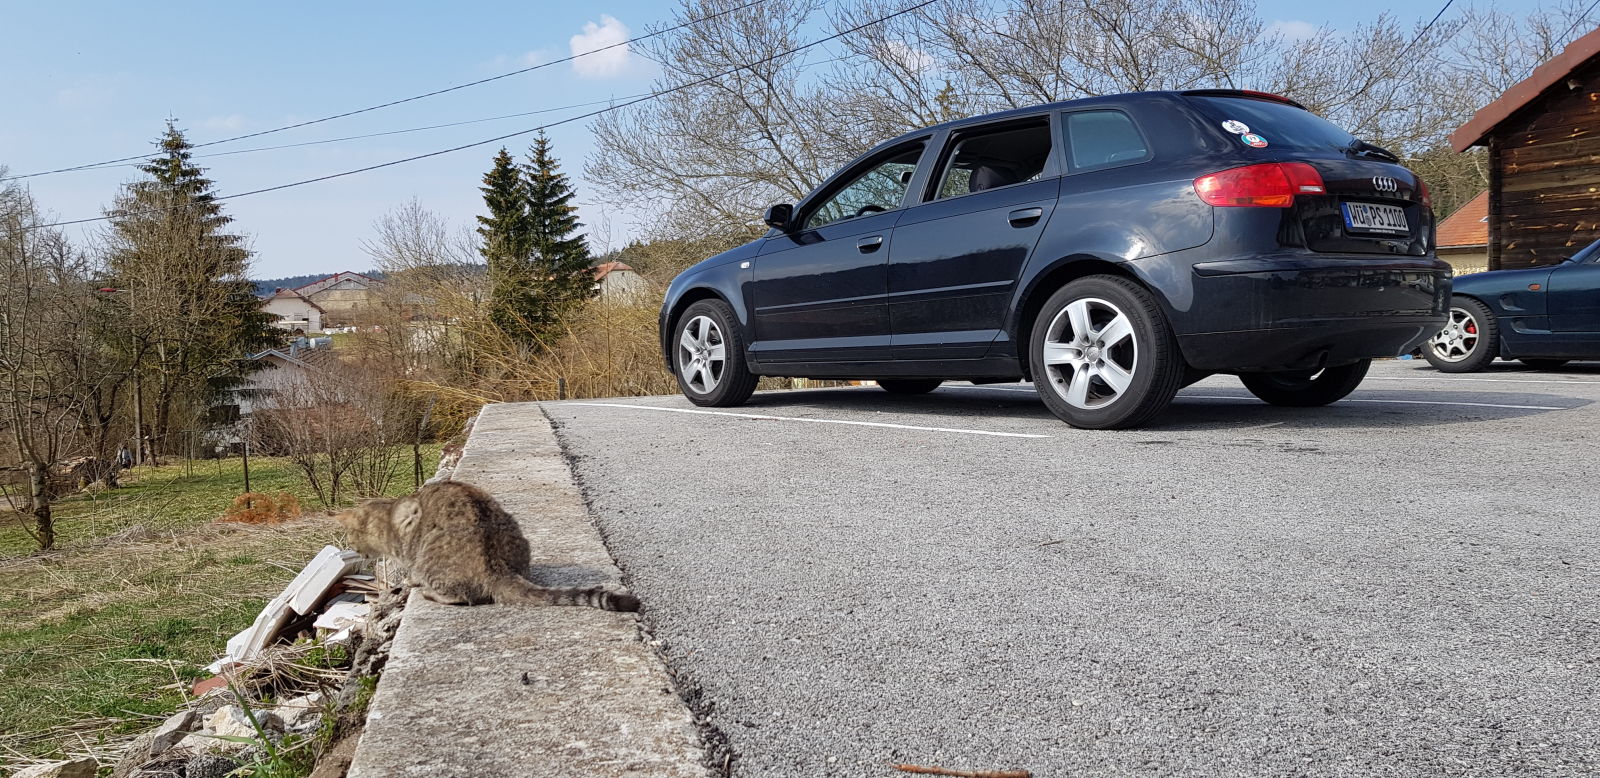 That cat seemed to like my car